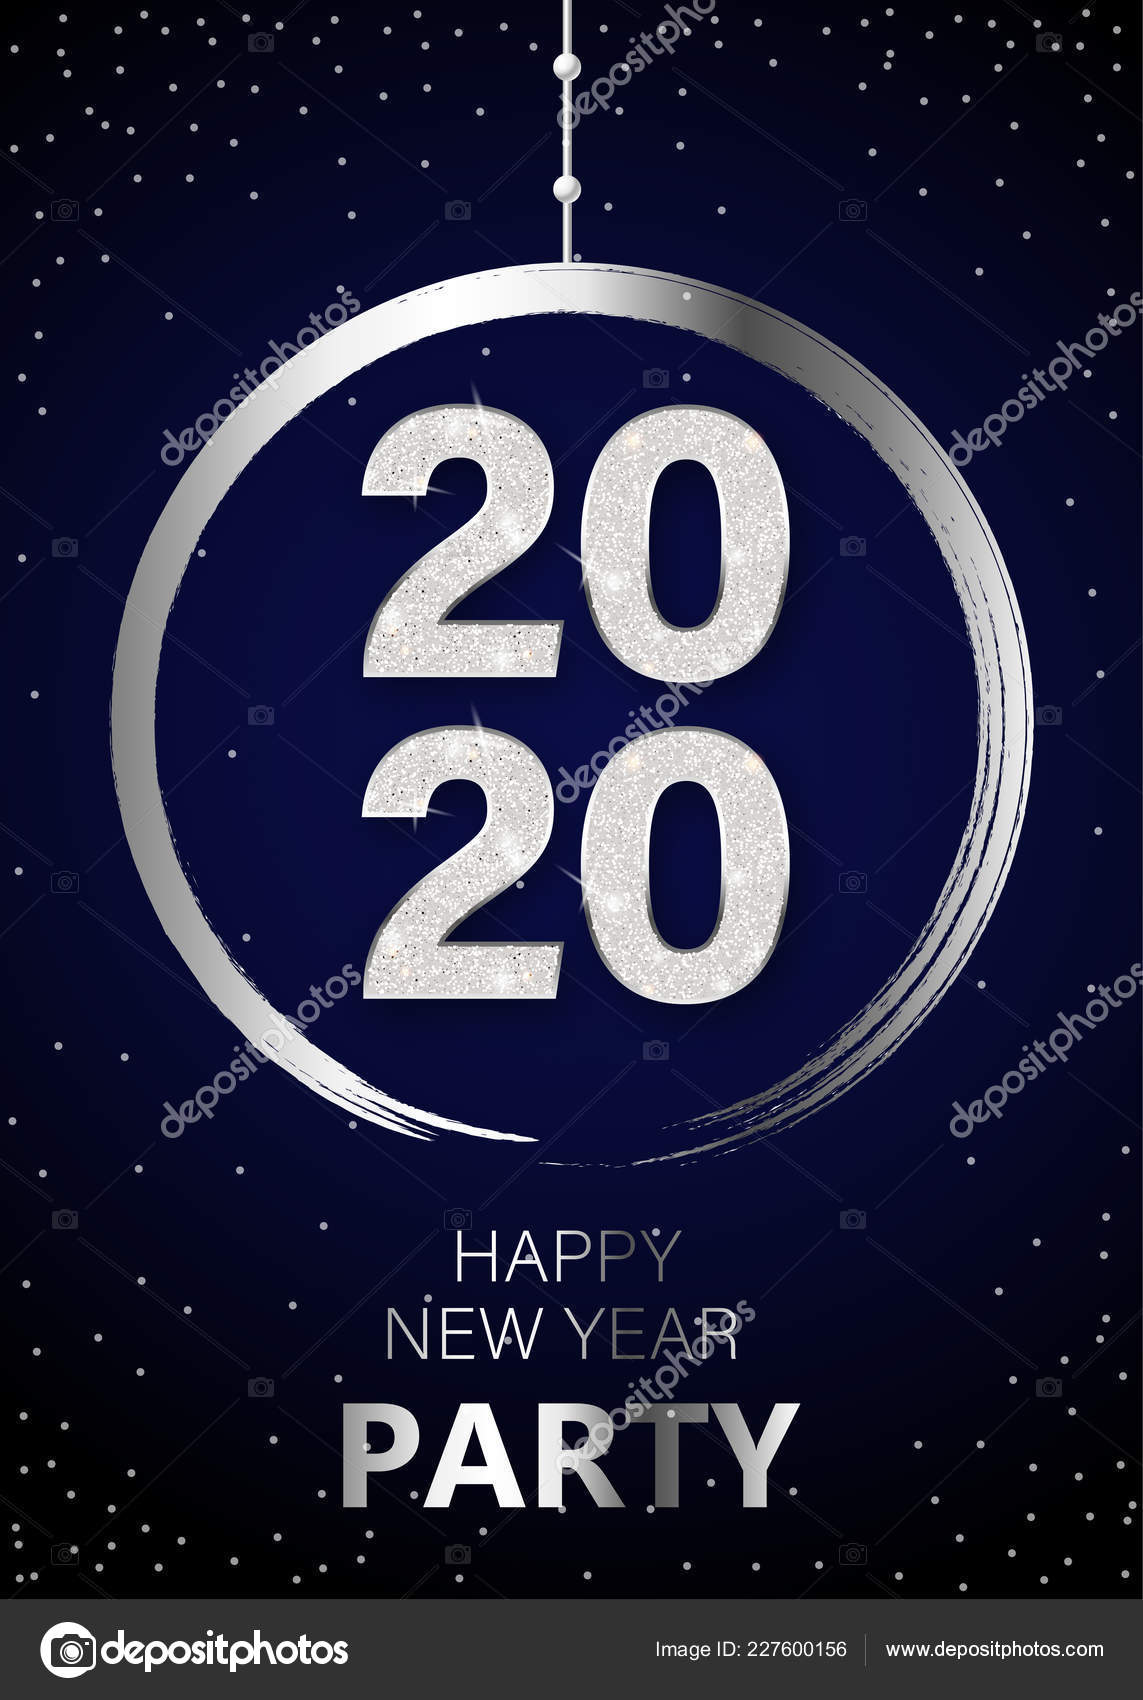 Happy New Year party 2020 poster with abstract Christmas ...